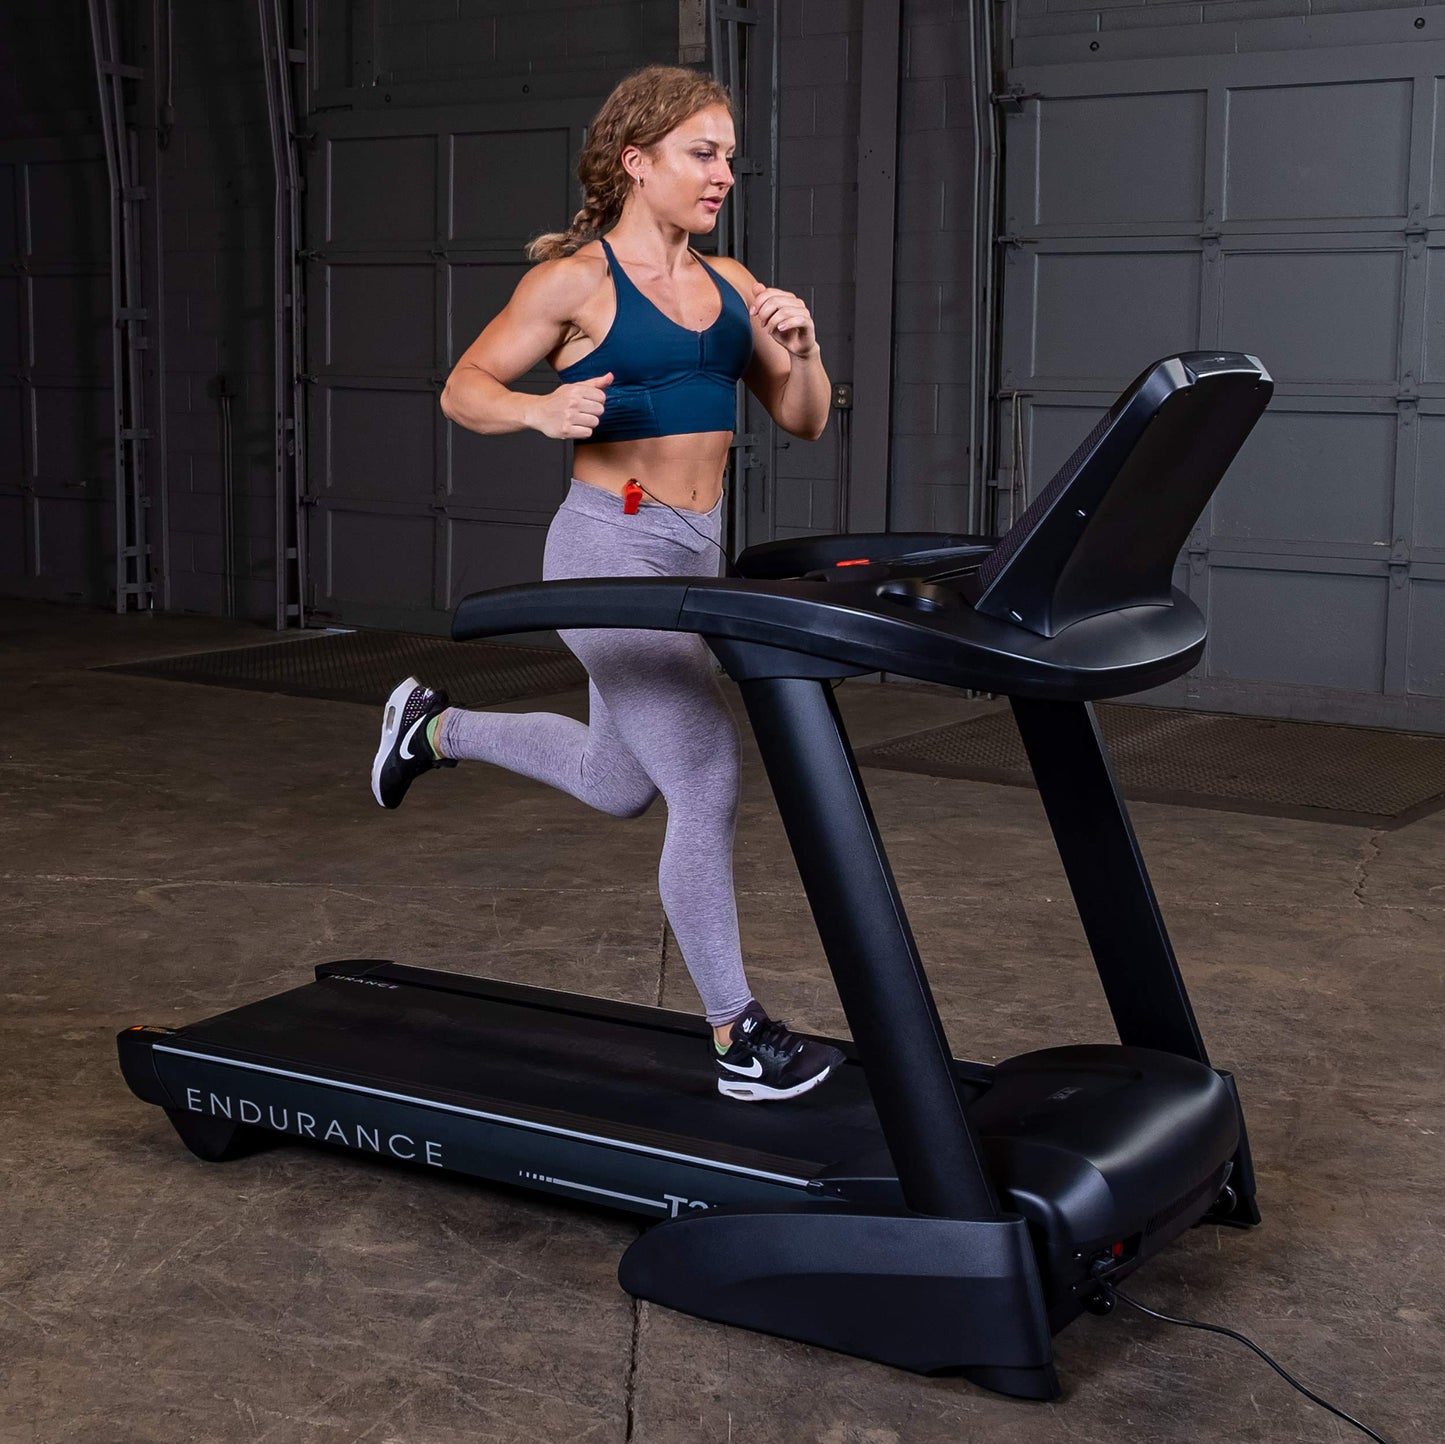 Body-Solid (T25) Foldable Incline Treadmill for Jogging & Walking, 400lbs. Weight Capacity, 4 HP Electric Motor Running Machine with Anti-Static Carbon Woven Belt, Speed Range 1-10 mph, Black